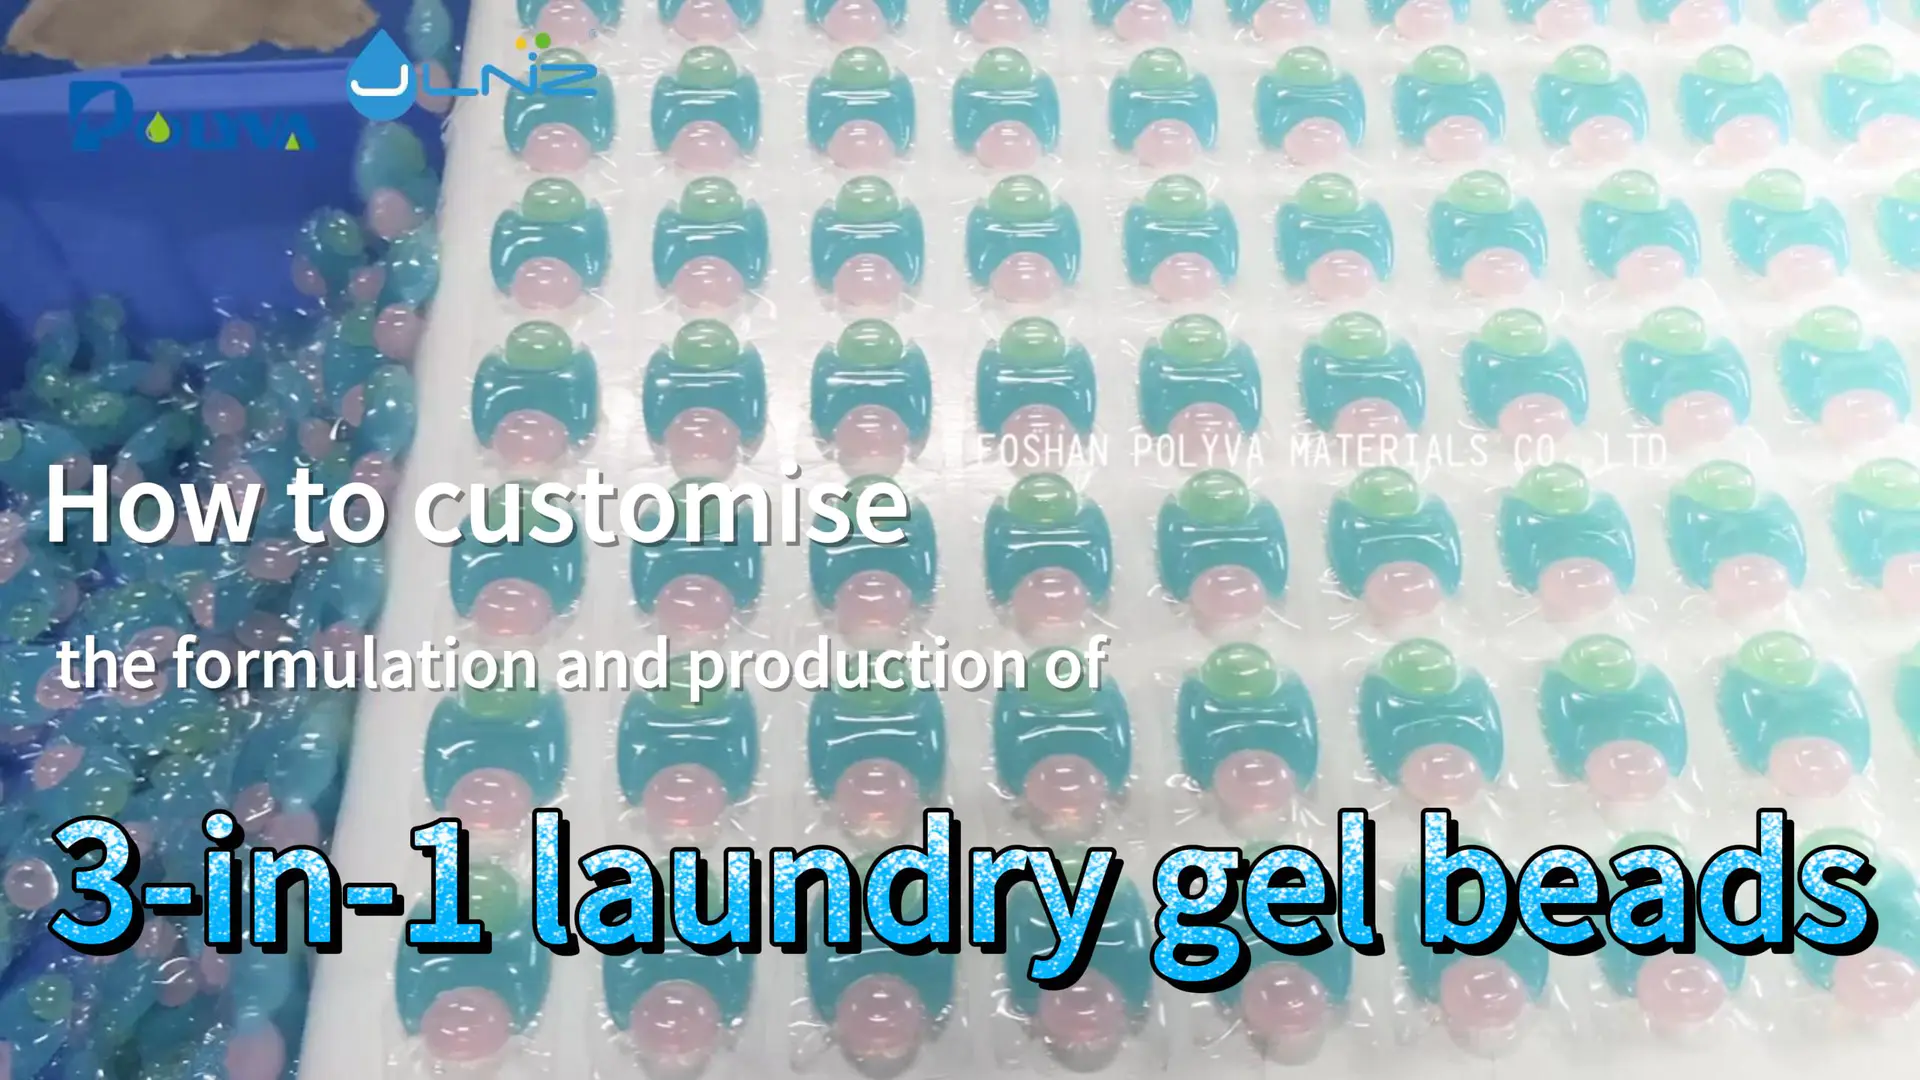 How to Customise the Formulation and Production of 3-in-1 Laundry Gel Beads | Polyva